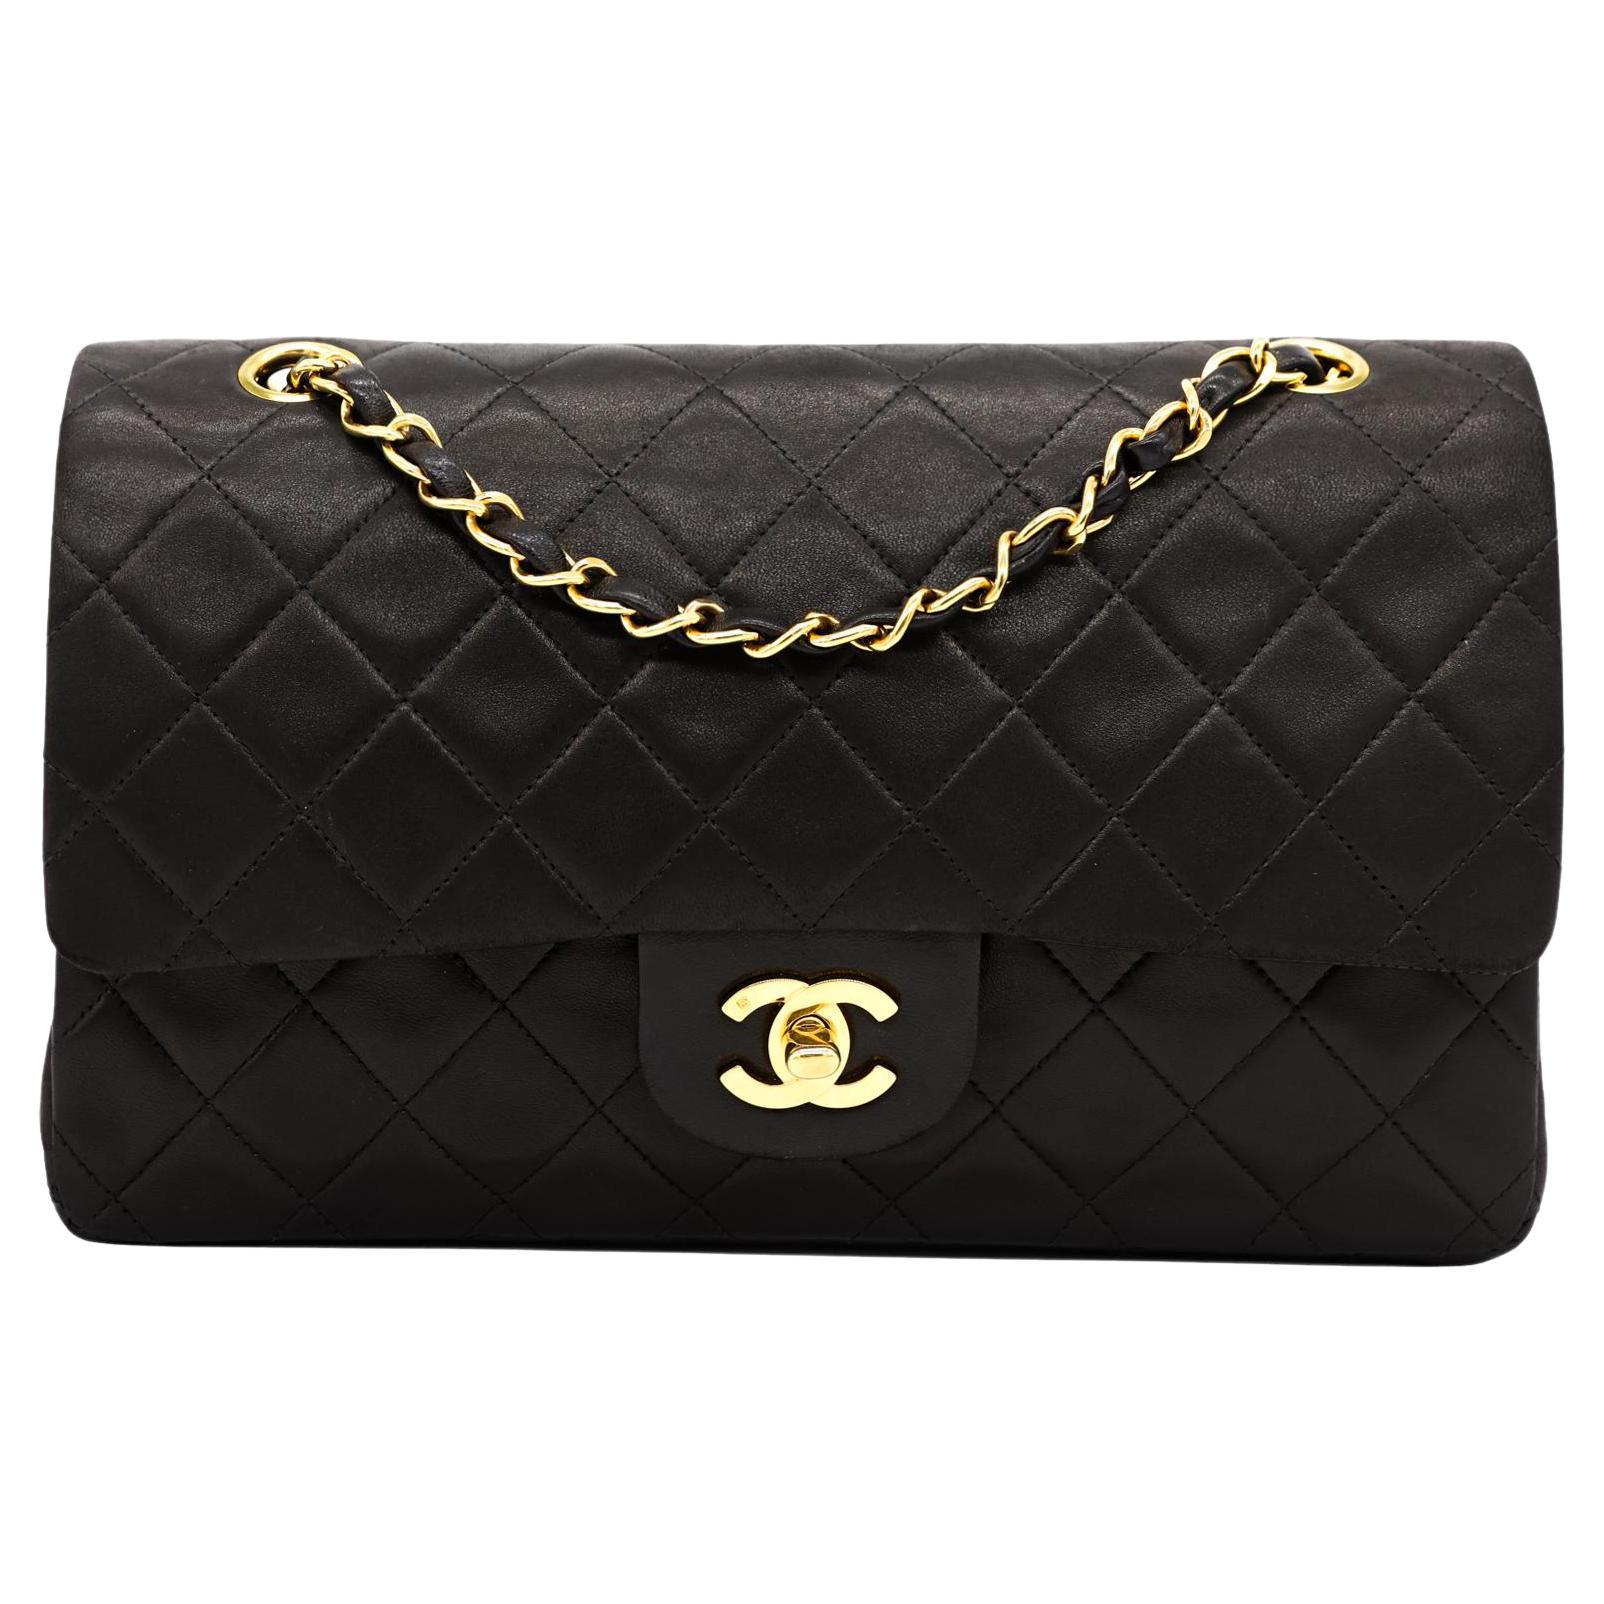 Chanel Timeless Black Medium Double Flap Quilted Lambskin Shoulder Bag, 2019.